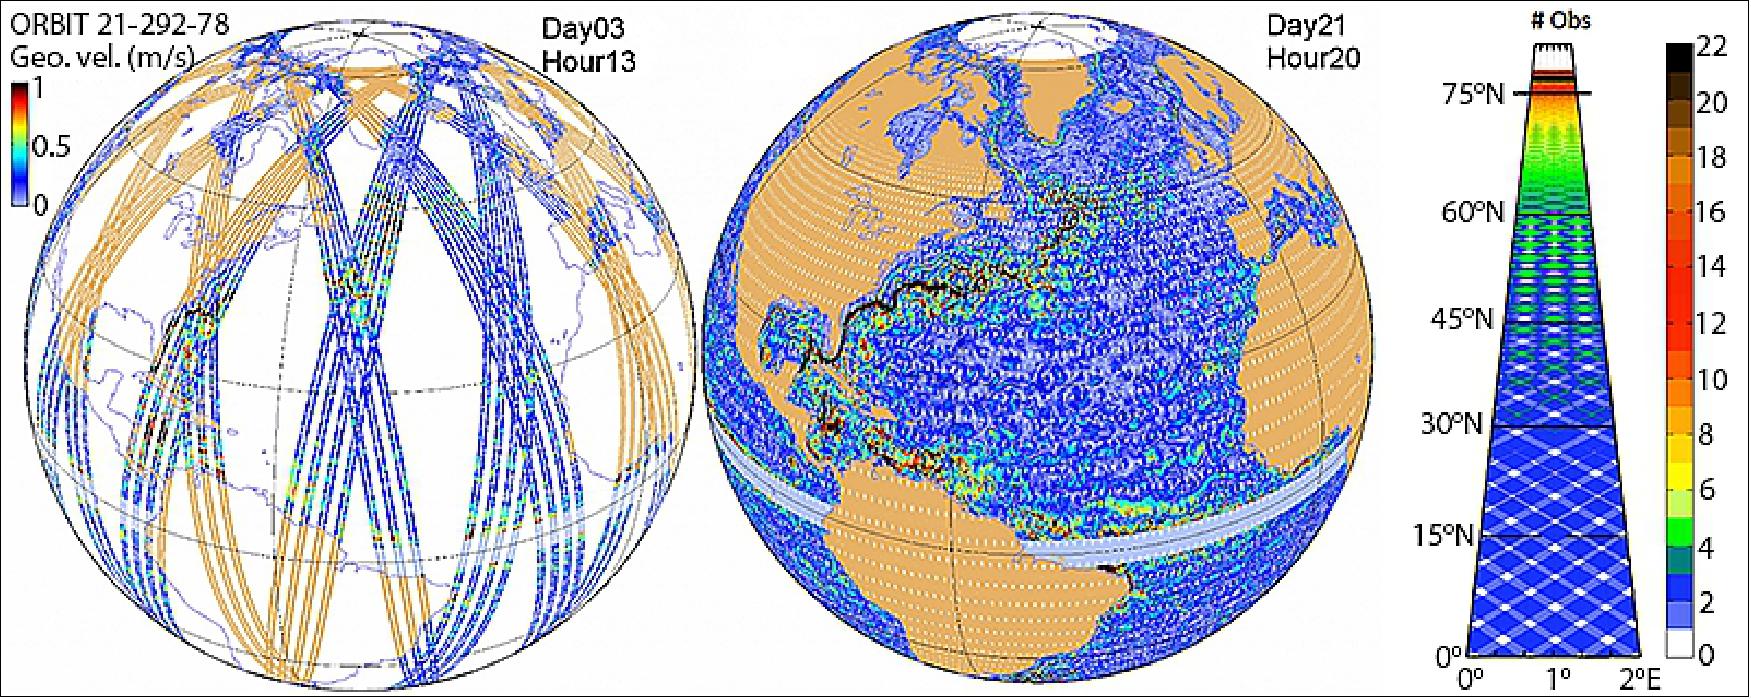 Figure 54: SWOT’s nominal orbit coverage up to 78ºN and 78ºS after (left) 3 days and (middle) the full 21 days of a complete cycle. Color shows the modeled surface currents for each track. Geo. vel. indicates surface geostrophic velocity (with the speed of currents in meters per second). (right) The number of observations at a given latitude (shown here for northern latitudes, but the same applies to the south) during the 21-day repeat period [image credit: (left and middle) C. Ubelmann, CLS; (right) JPL/NASA]